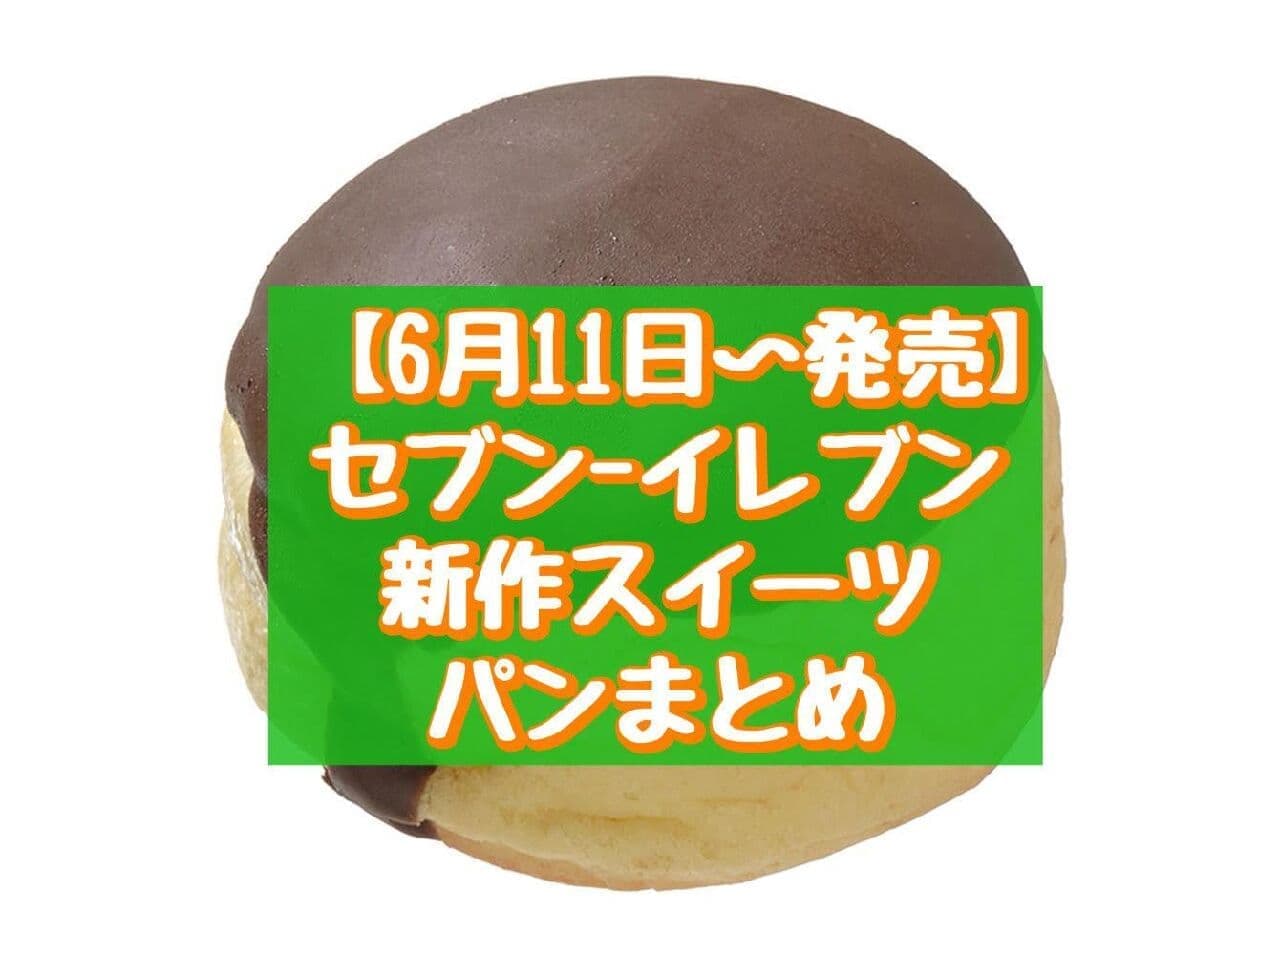 7-ELEVEN's new sweets and breads